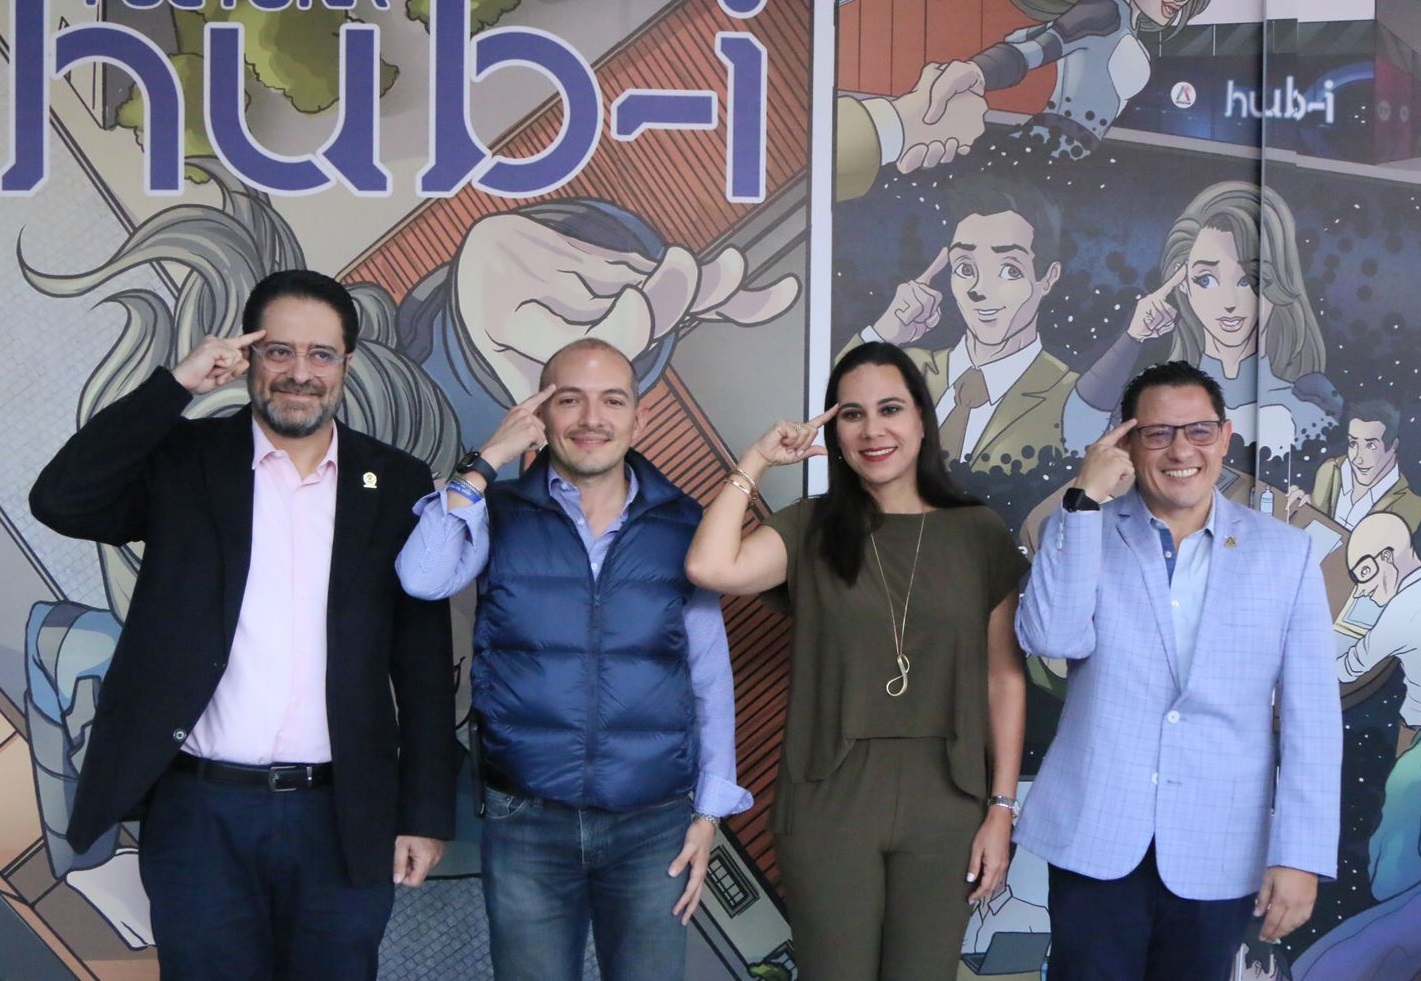 The second Hub-i starts in the municipality of Irapuato